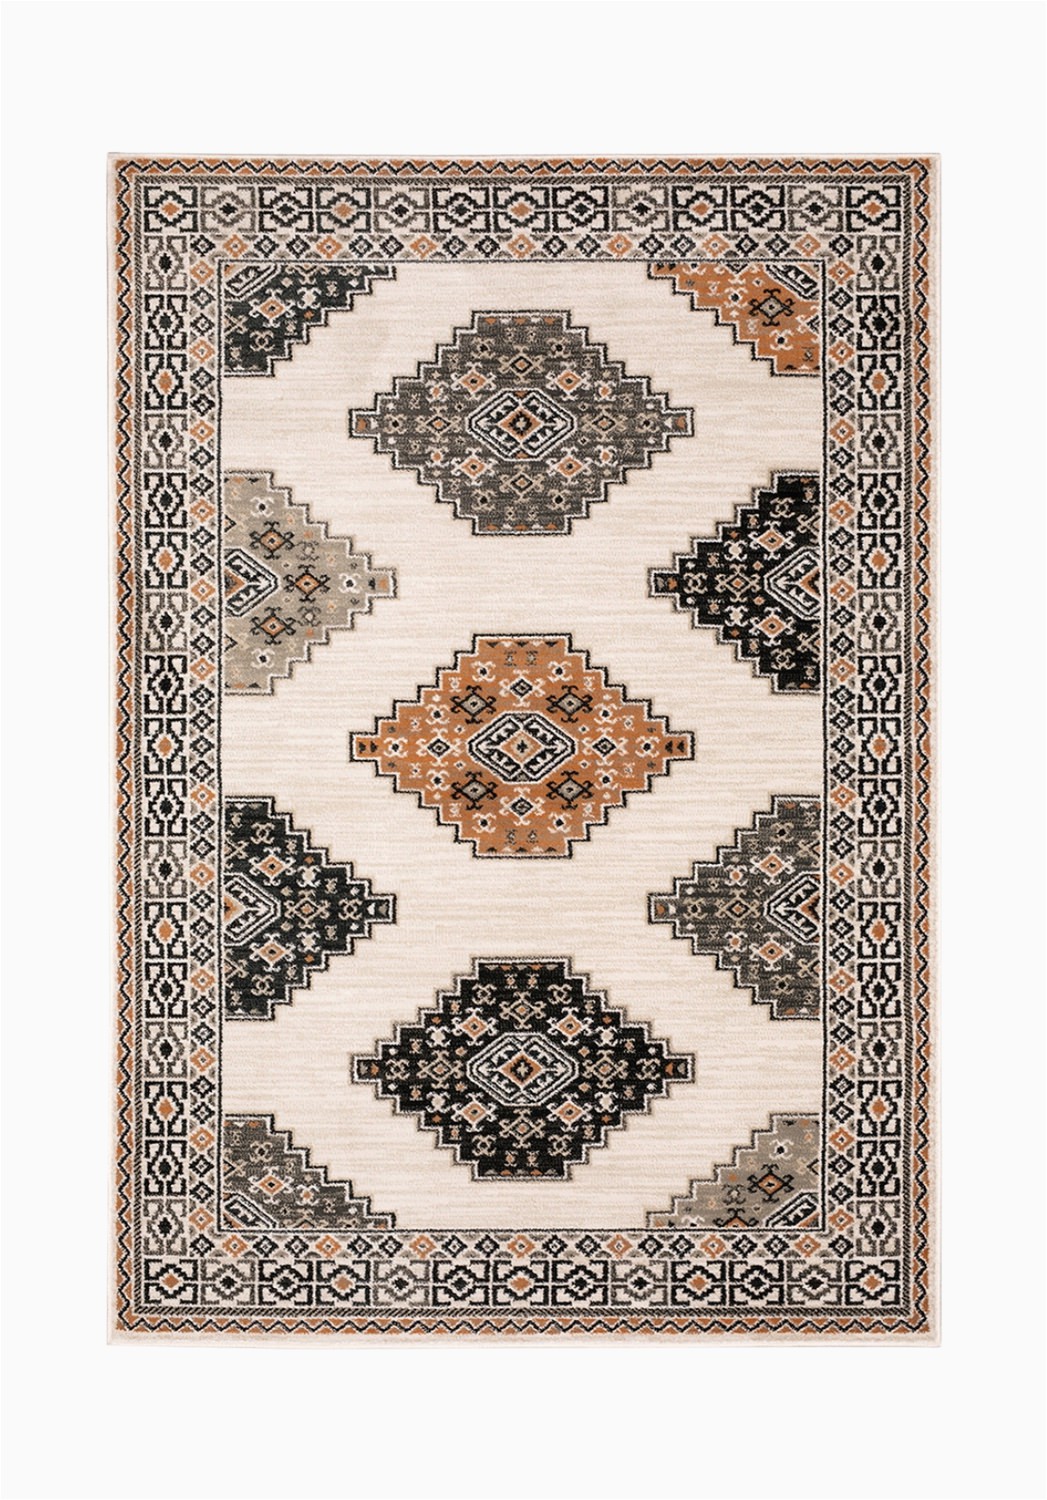 Buy now Pay Later area Rugs Georgia Tribal Tan Black area Rug